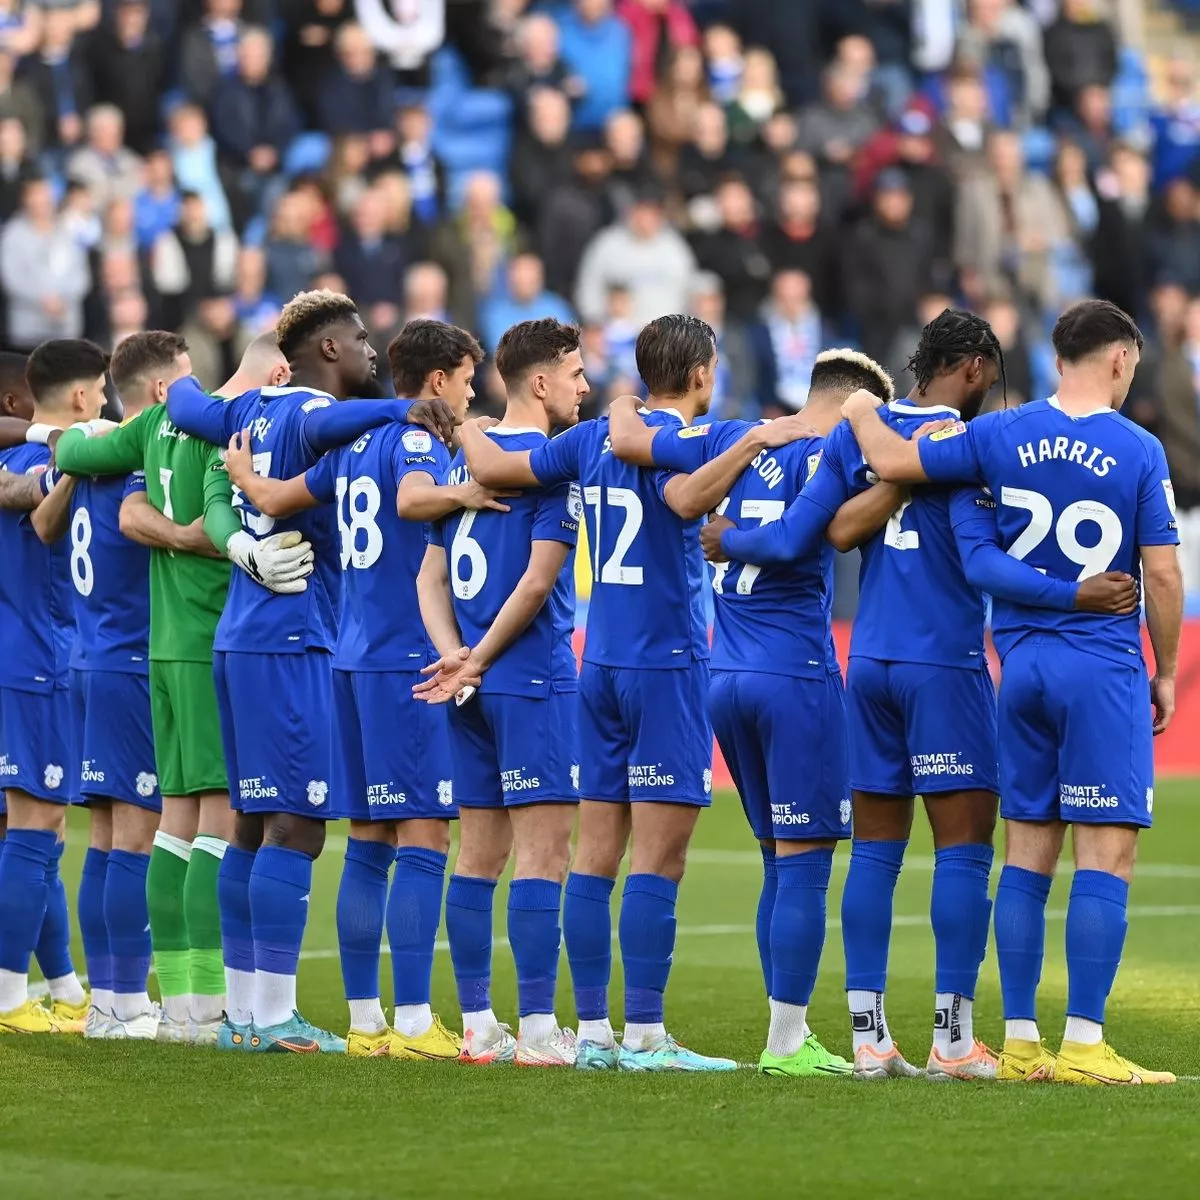 According to BBC report: Cardiff City Ladies release statement on coaching appointment ahead of Champions League…